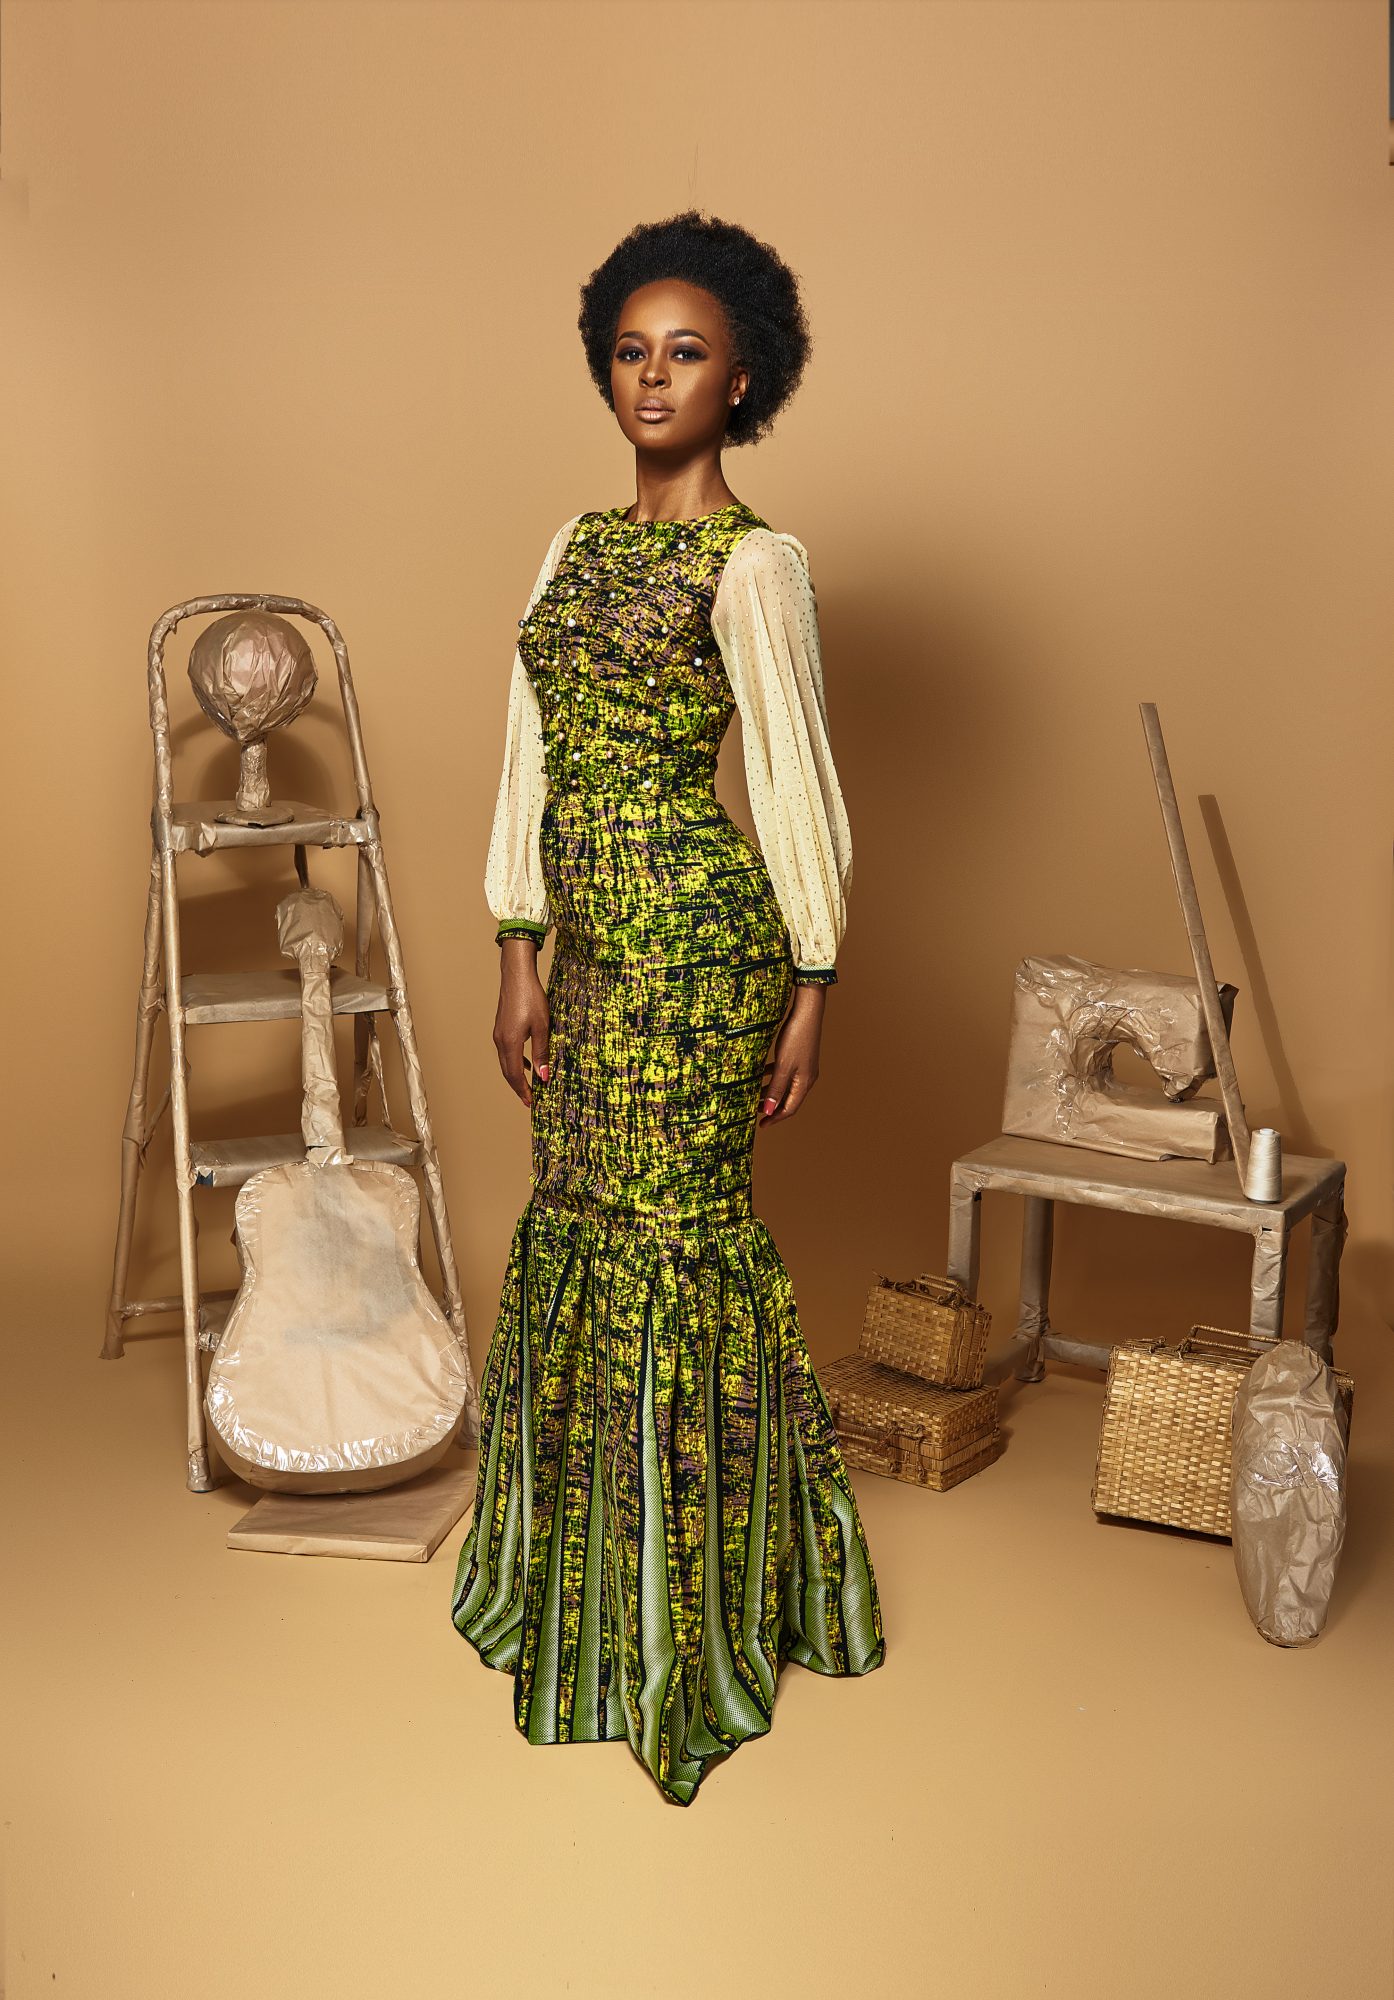 Afor Tumban debuts her personal style in Phoenix #Ankara #Cameroon #Couture #AfricanPrint